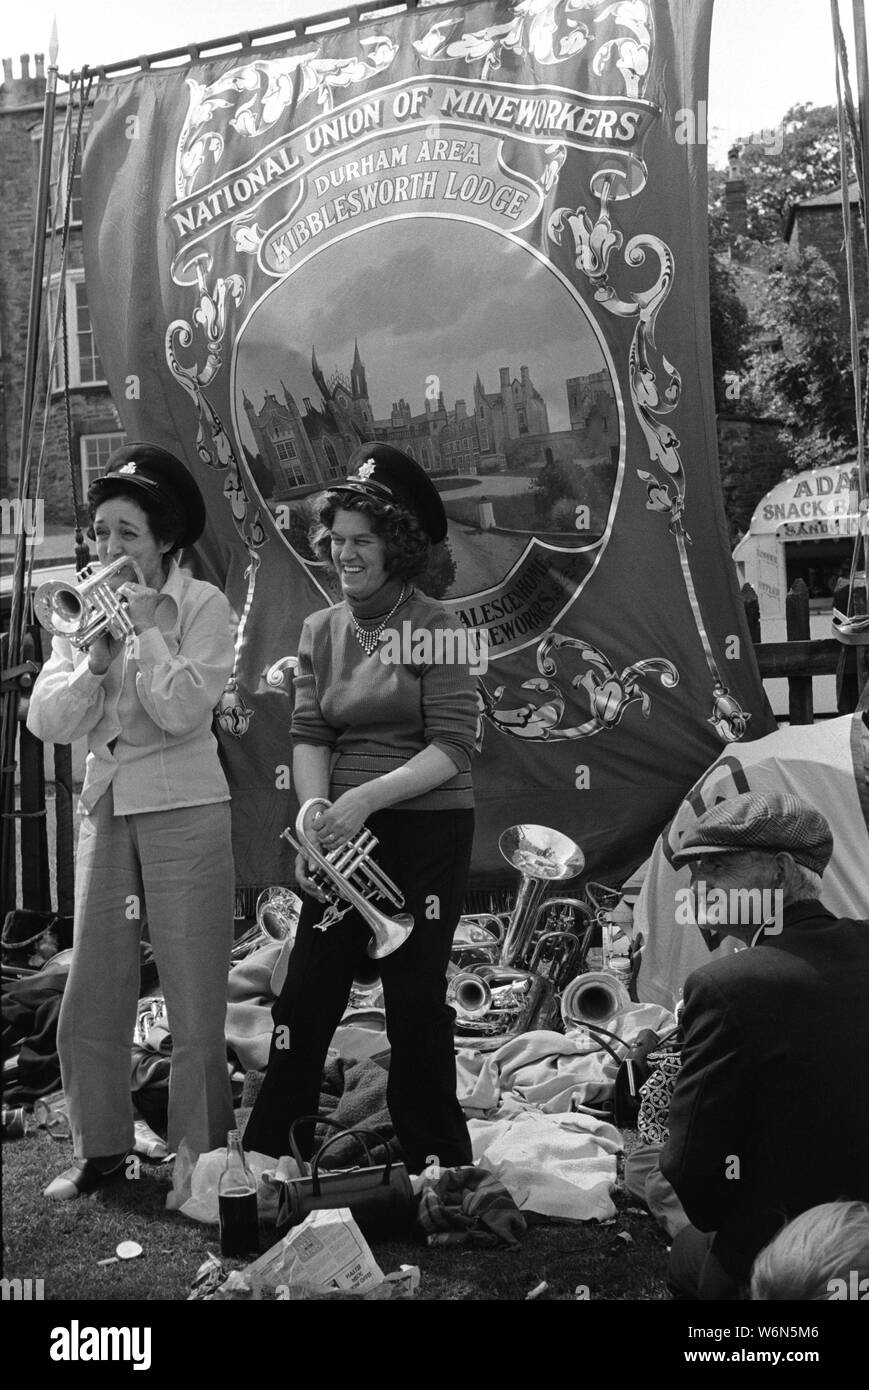 Durham Miners Gala. Two coal miners wives, are having fun and playing on the colliery silver bands musical instruments under the National Union of Mineworkers, Durham area Kibblesworth Lodge banner 70s County Durham, England UK 1970s.  HOMER SYKES Stock Photo